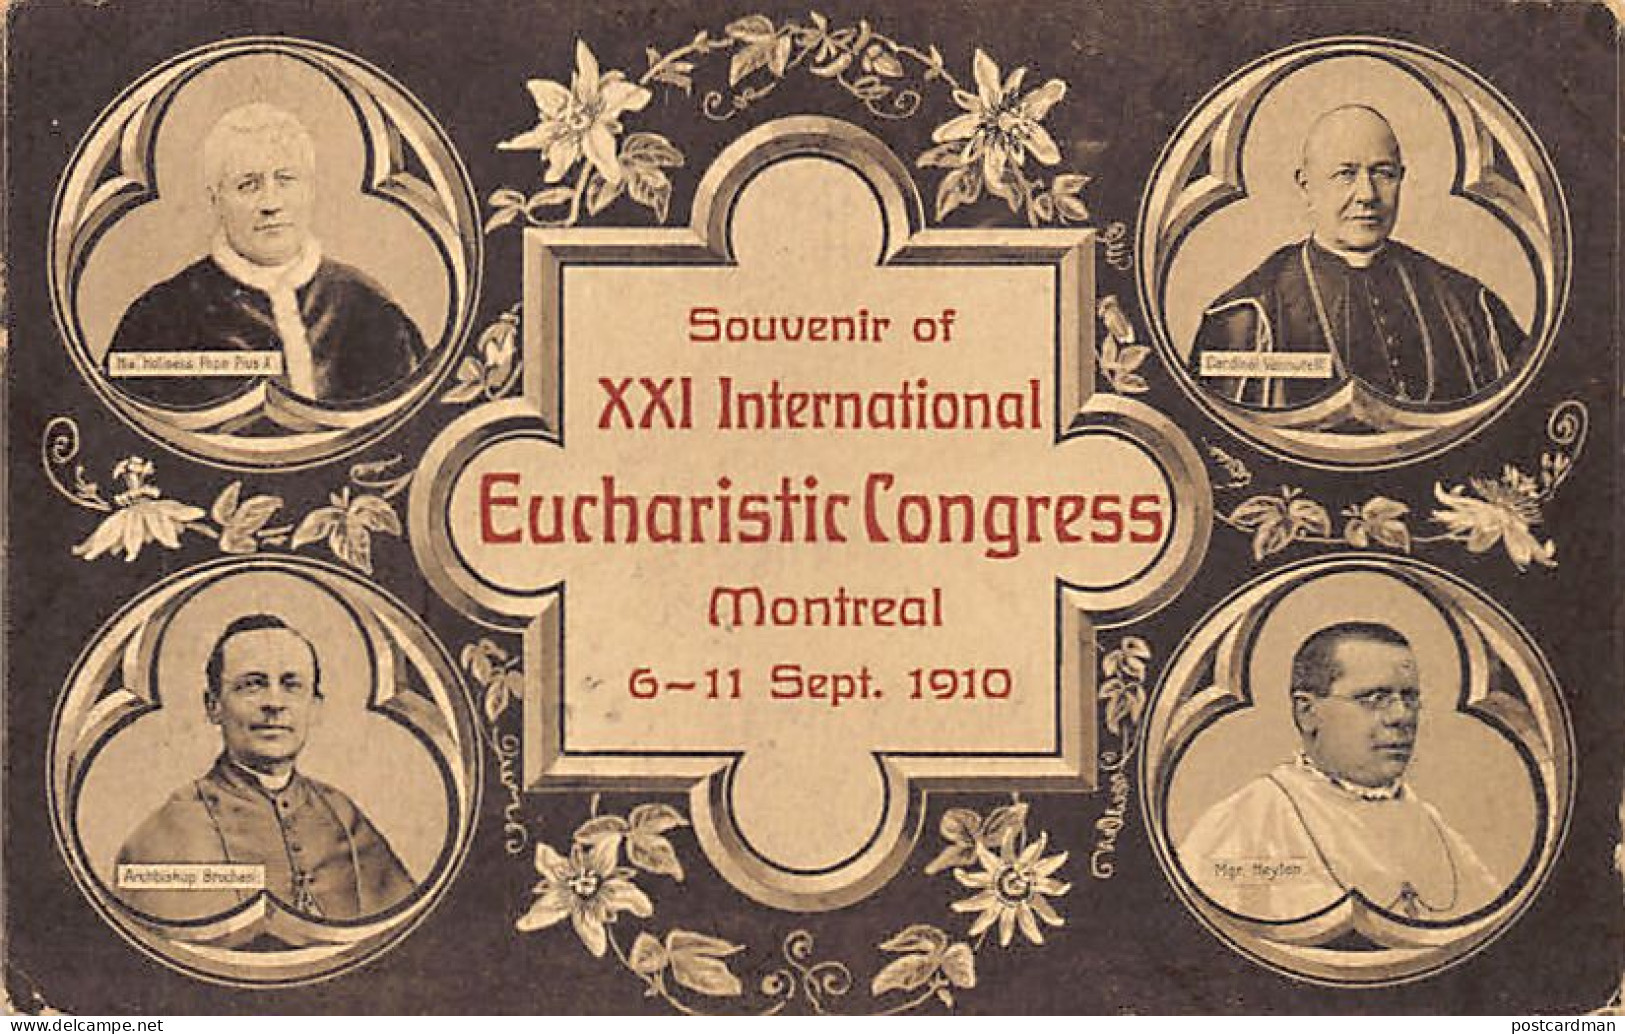 Canada - MONTREAL (QC) XXIst International Eucharistic Congress - 6-11 Sept. 1910 - Ed. Illustrated Post Card Co.  - Montreal